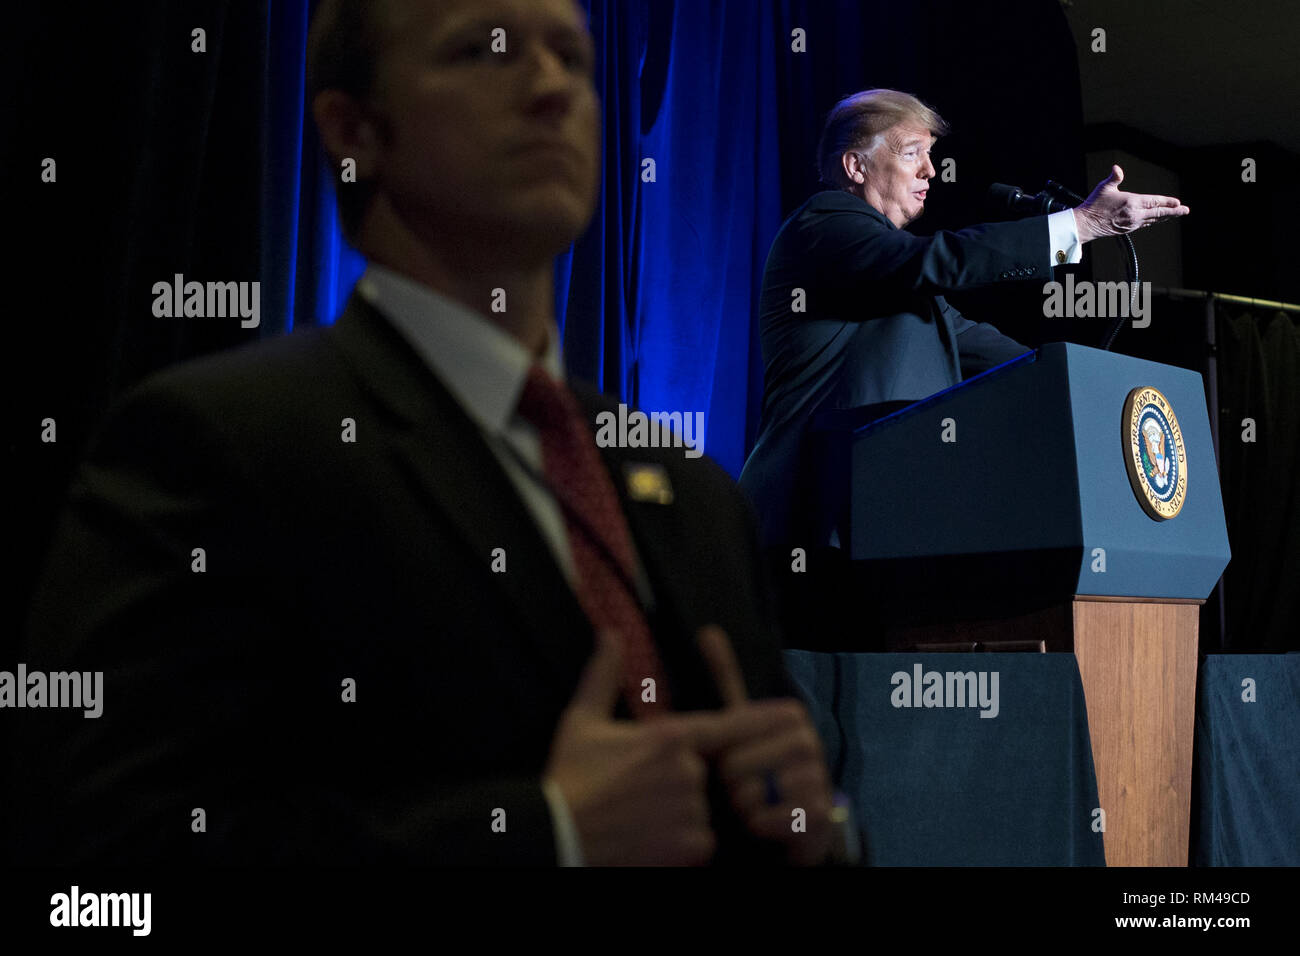 US President Donald J. Trump (R) is seen behind a US Secret Service agent delivering remarks at the Major County Sheriffs and Major Cities Chiefs Association Joint Conference, in Washington, DC, USA, 13 February 2019. Trump took the opportunity to deliver remarks on his border-security and immigration policy. Republican leaders are asking Trump to sign legislation that allocates about 1.375 billion USD (1.218 billion euros) for over fifty miles of physical barriers along the border. Signing the agreement would prevent another partial shutdown of the federal government that would begin 16 Febru Stock Photo